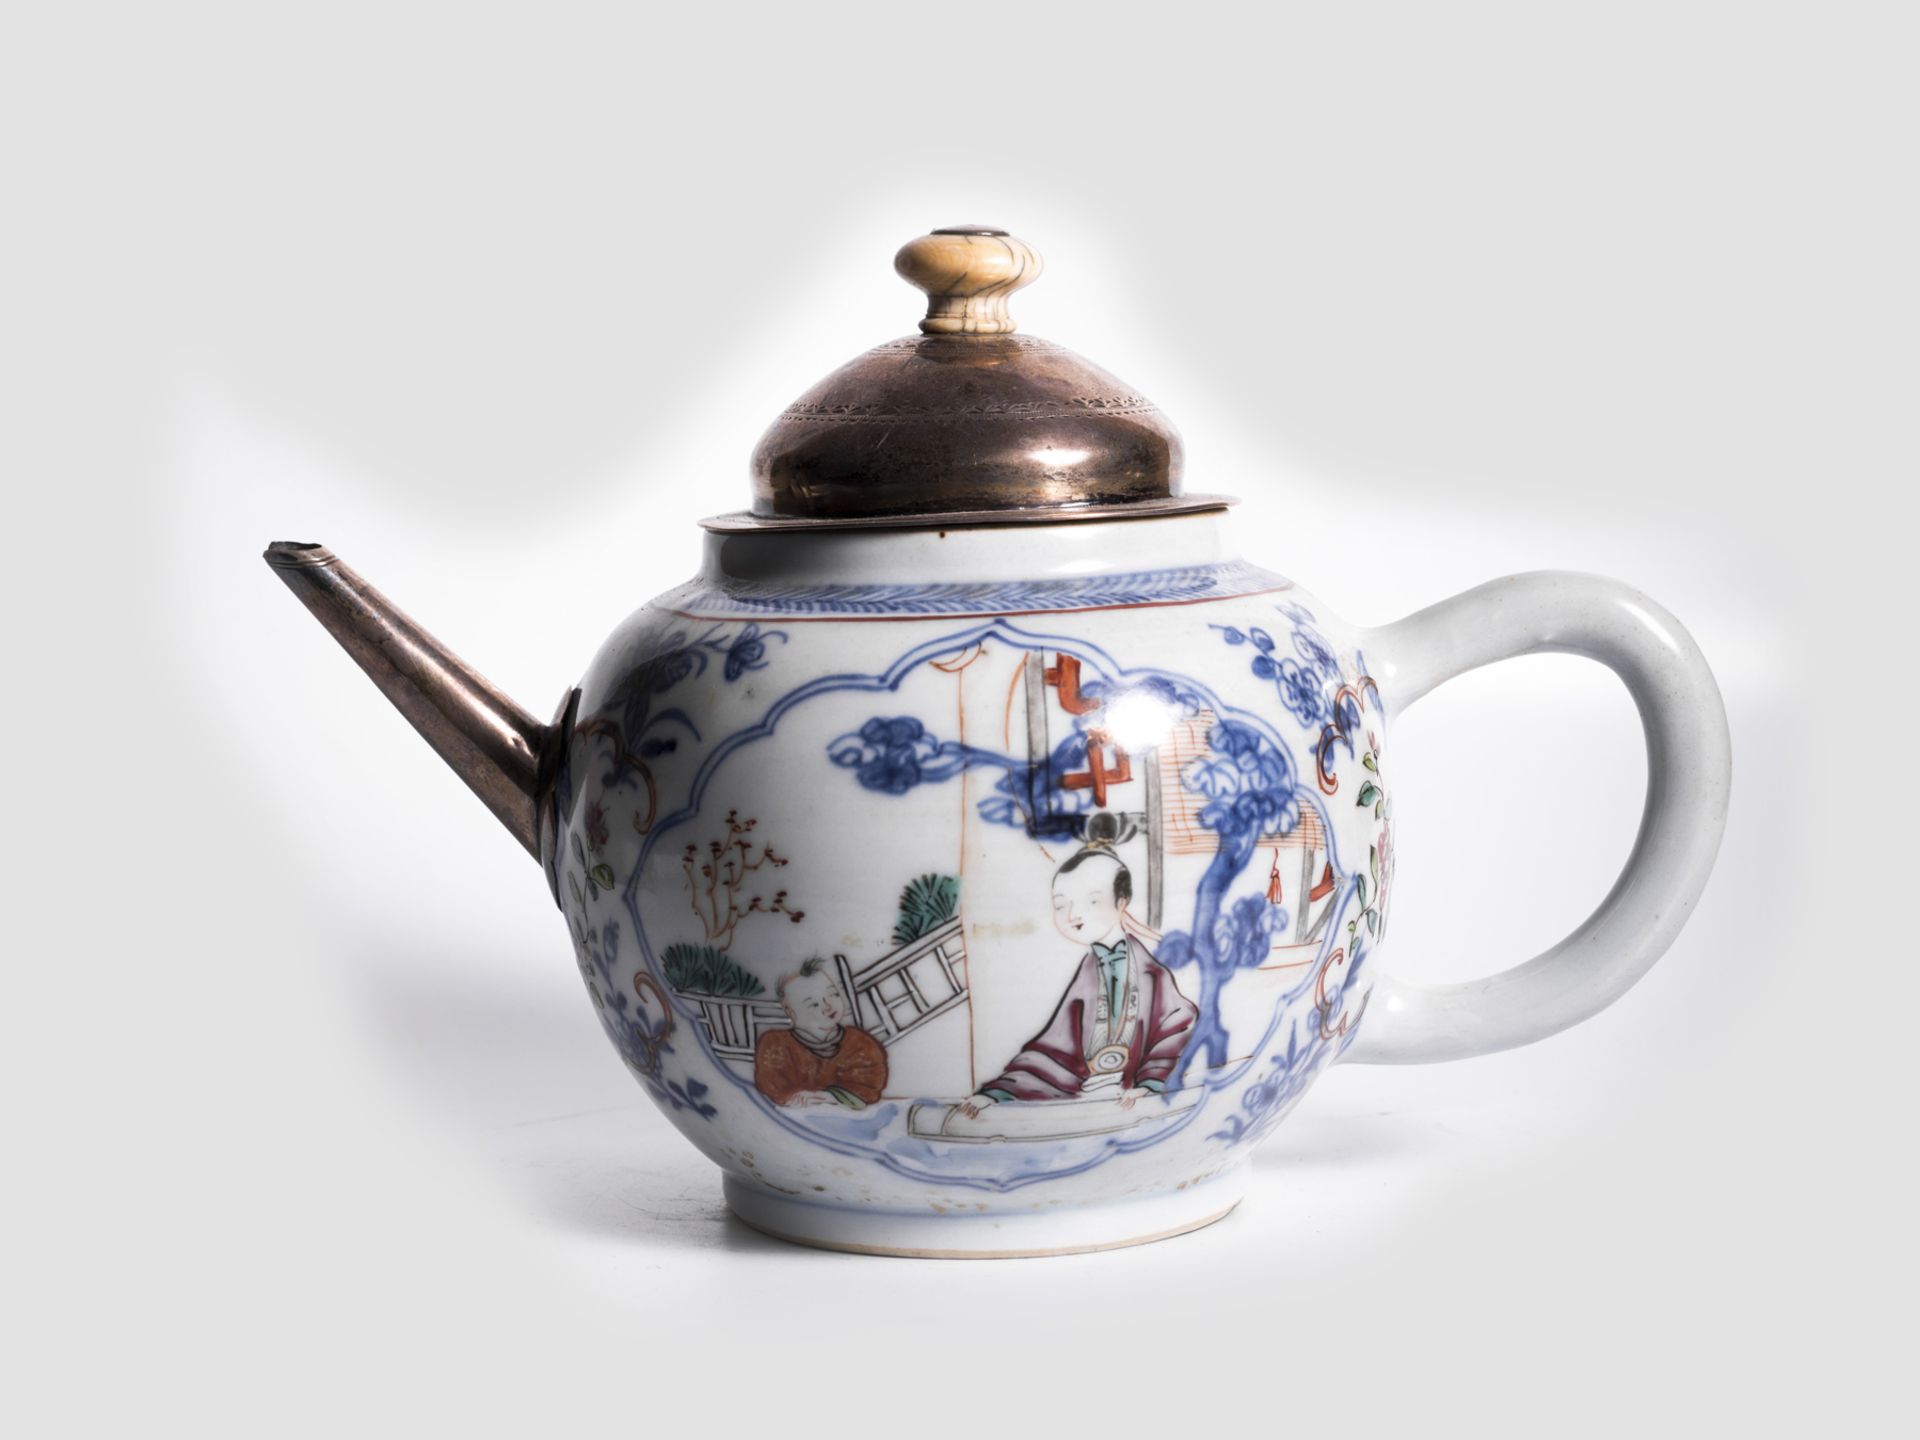 Teapot, China, Quing dynasty